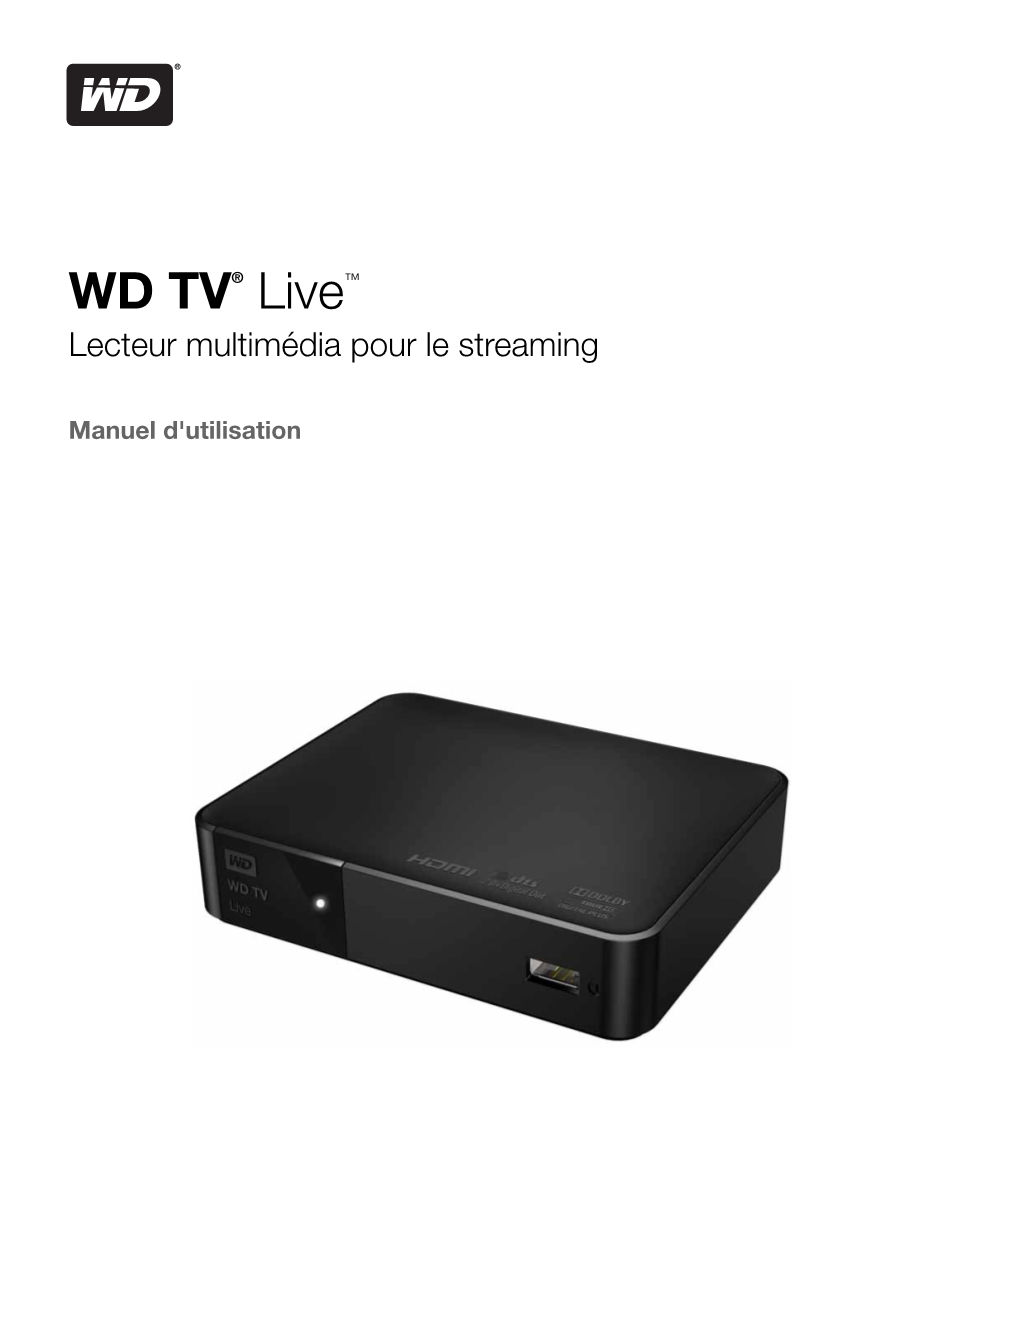 WD TV Live Streaming Media Player User Manual